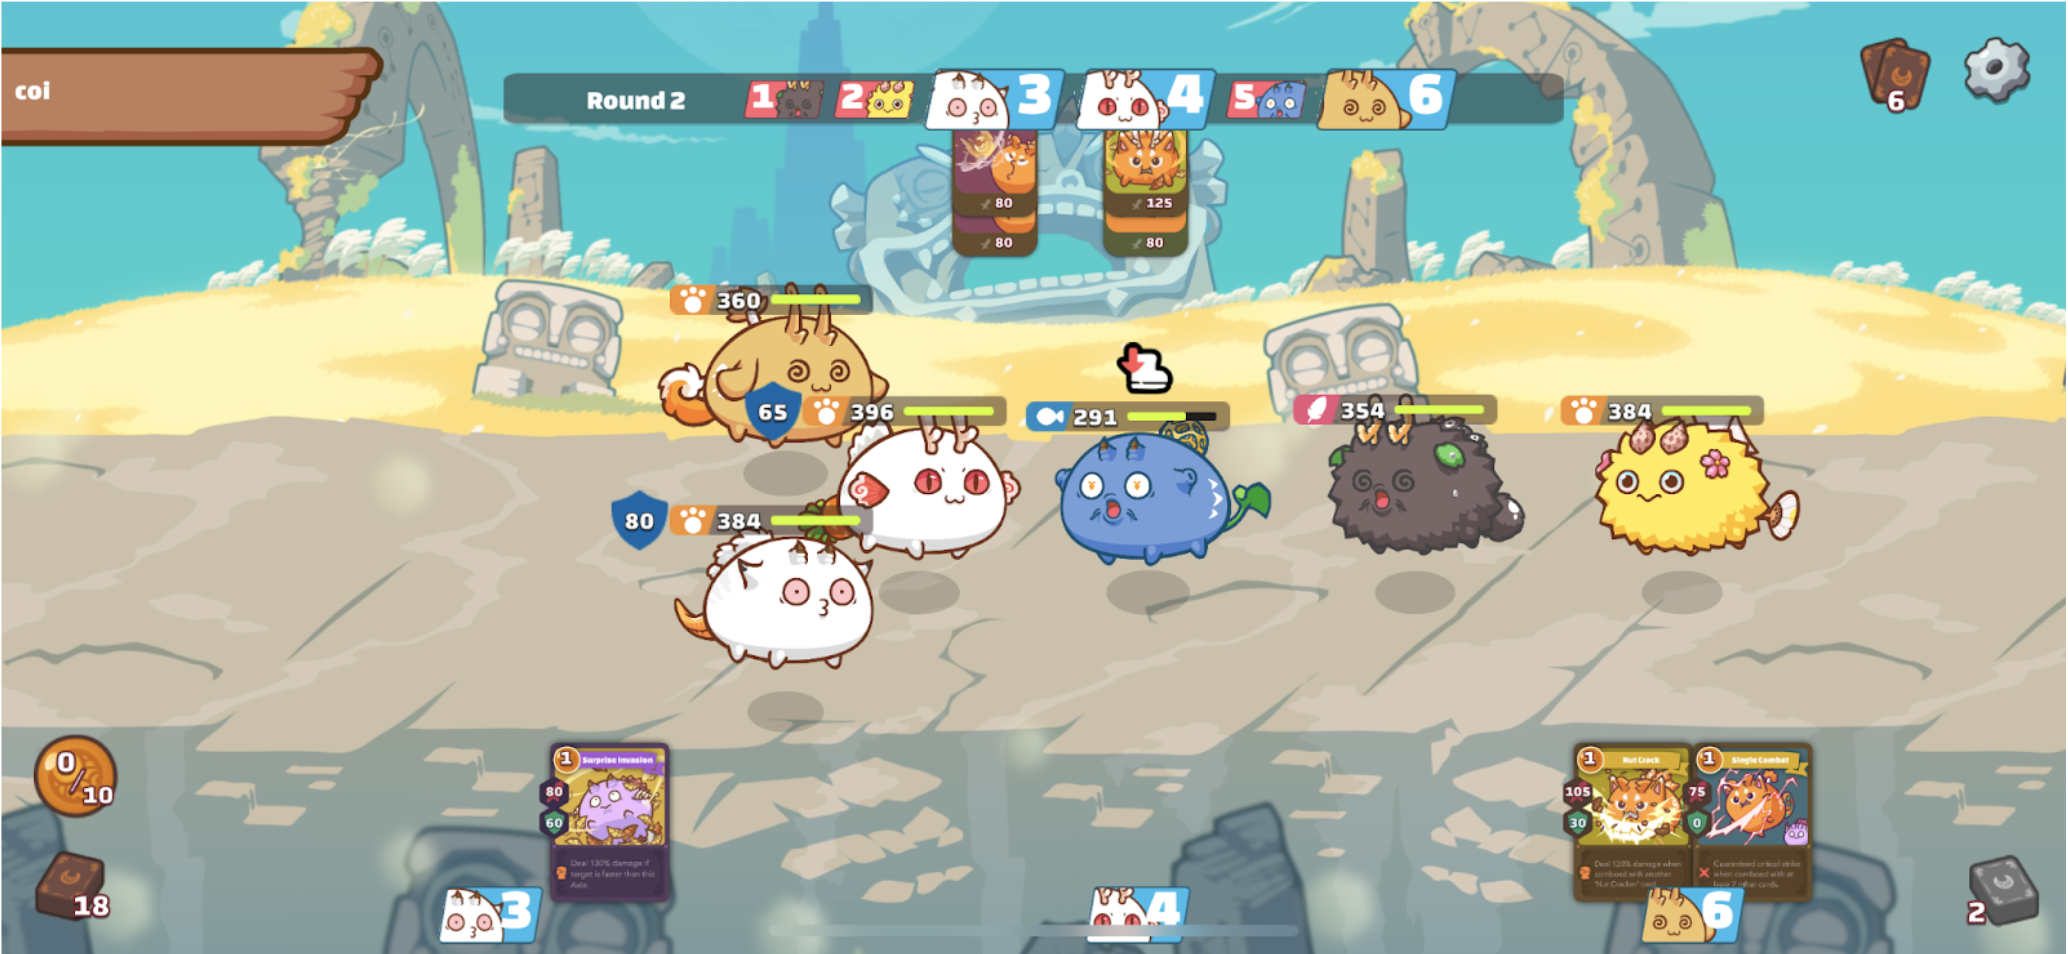 Axie Infinity Game Interface